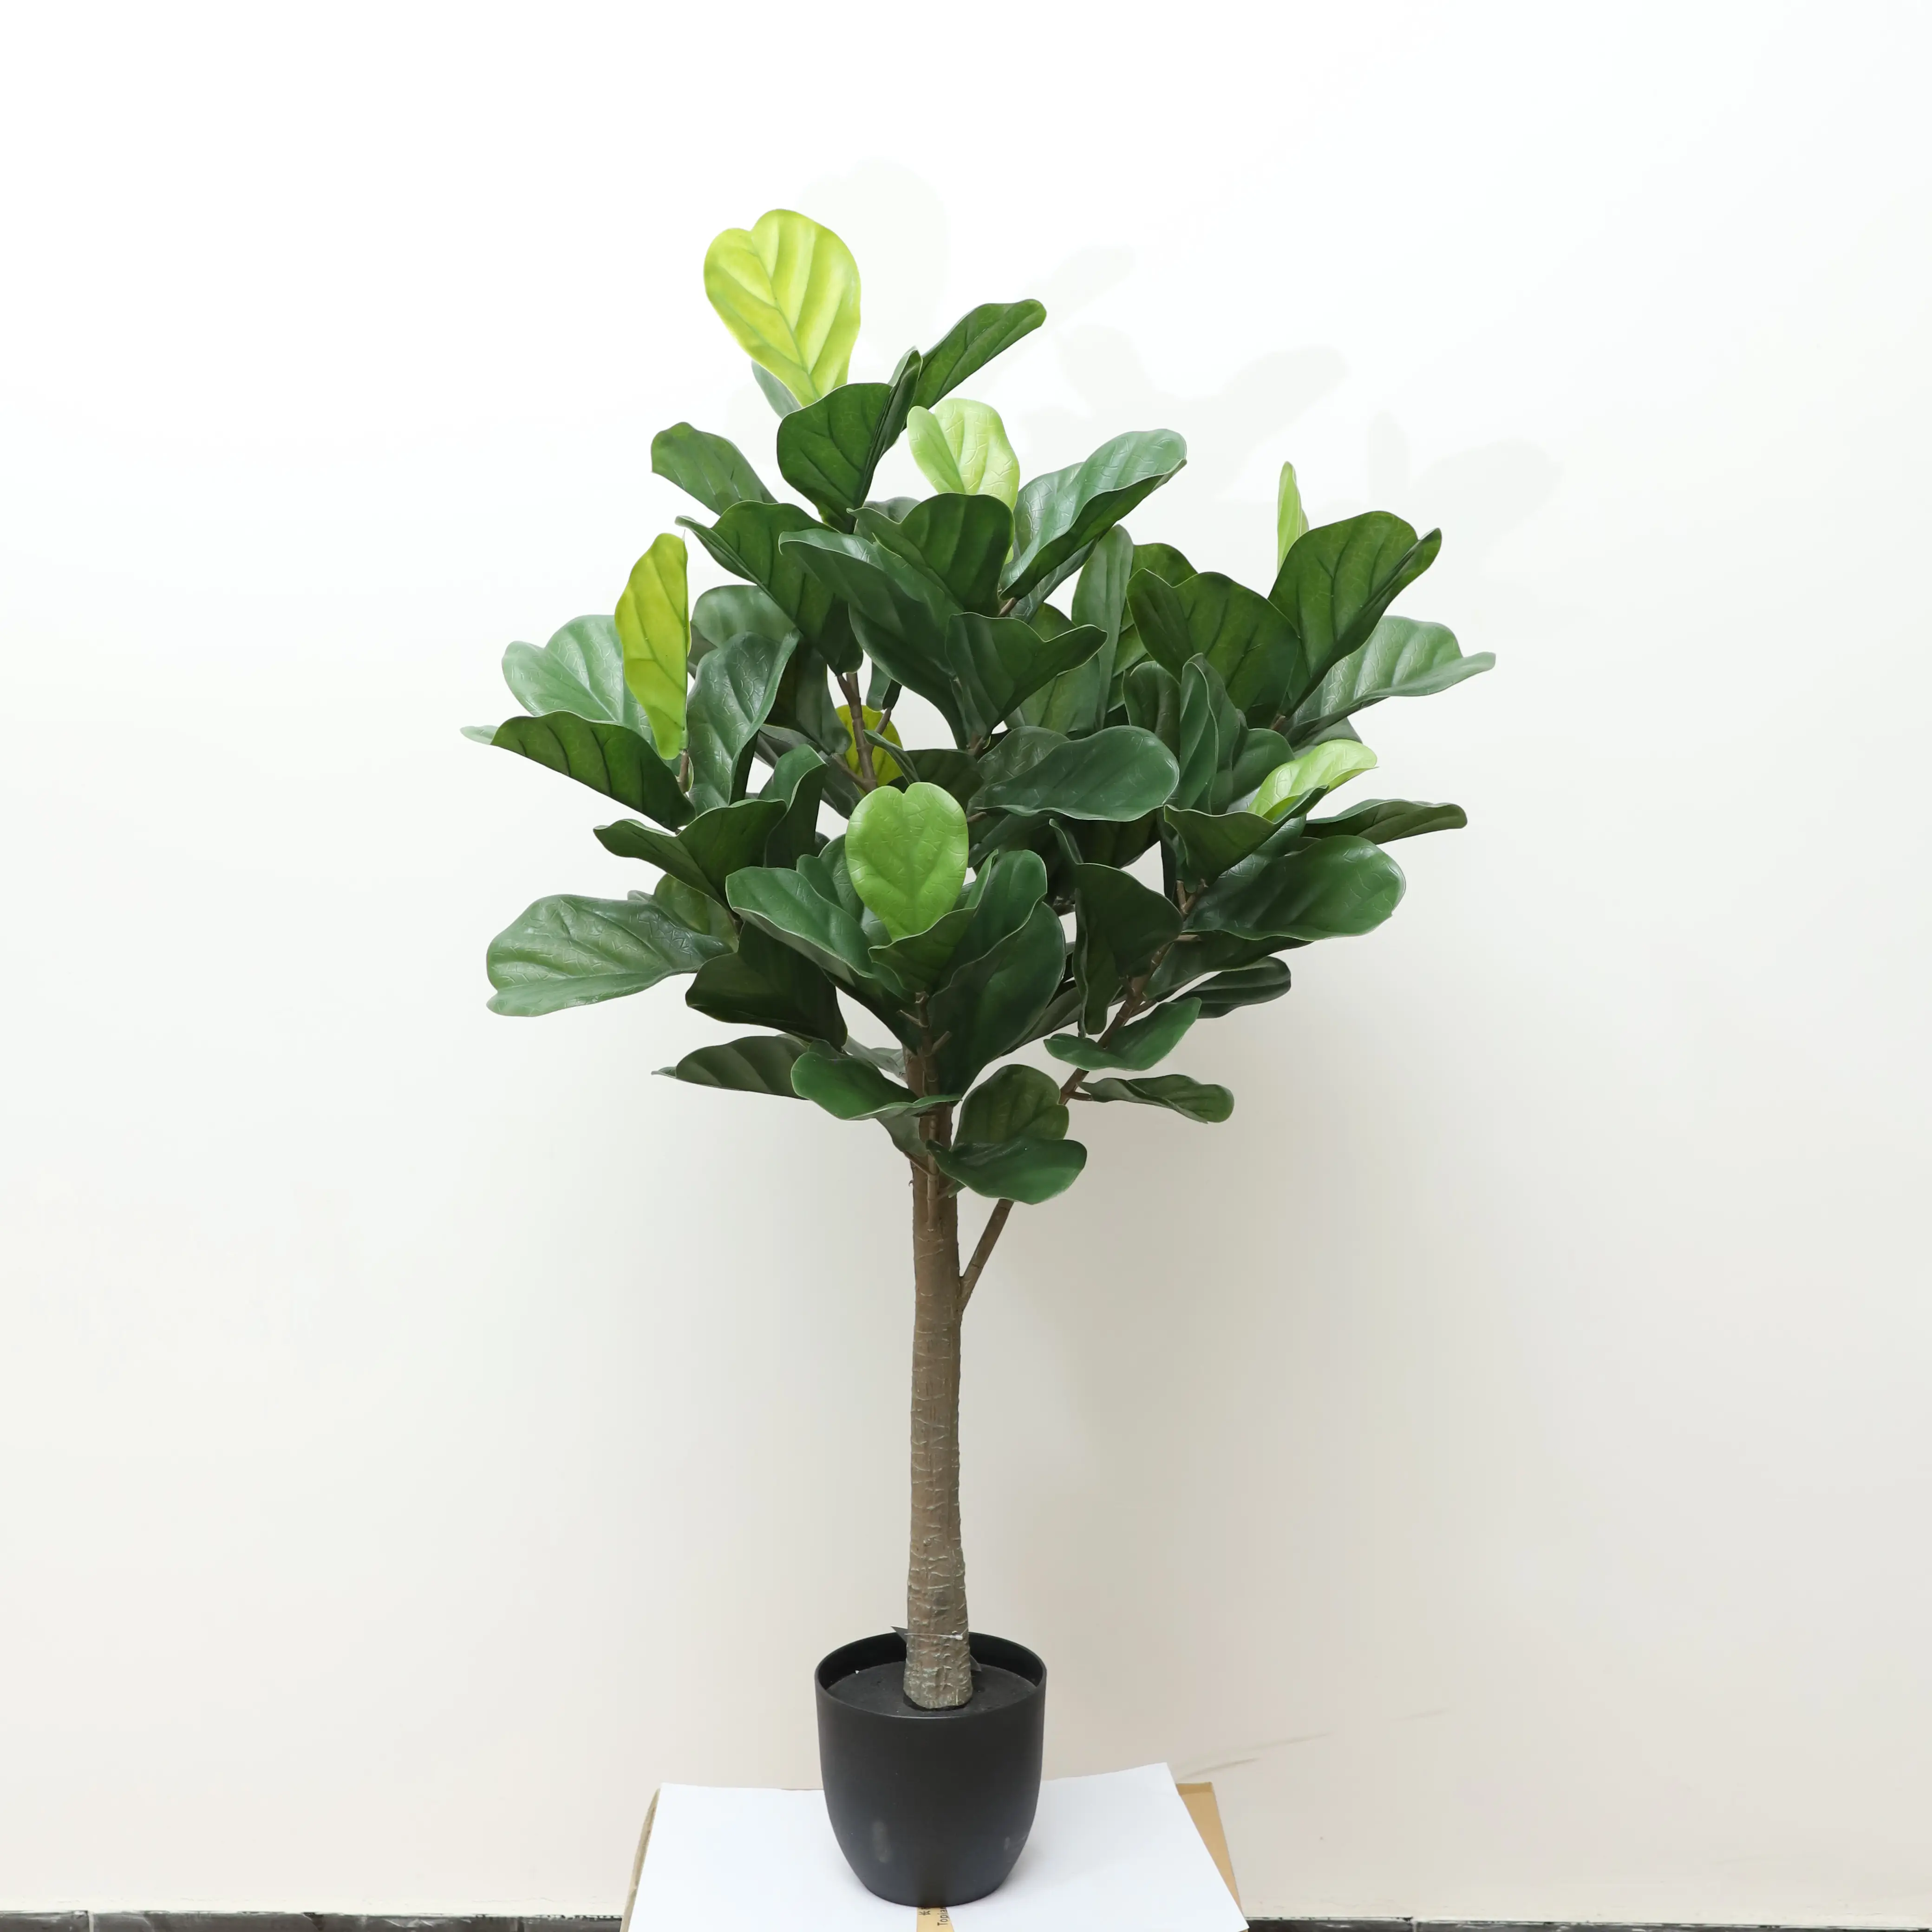 Direct Selling Other Home Decor Bonsai Tree Plastic Preserved artificial pot plants Flameproof Fiddle Leaf Fig Tree Ficus Lyrata